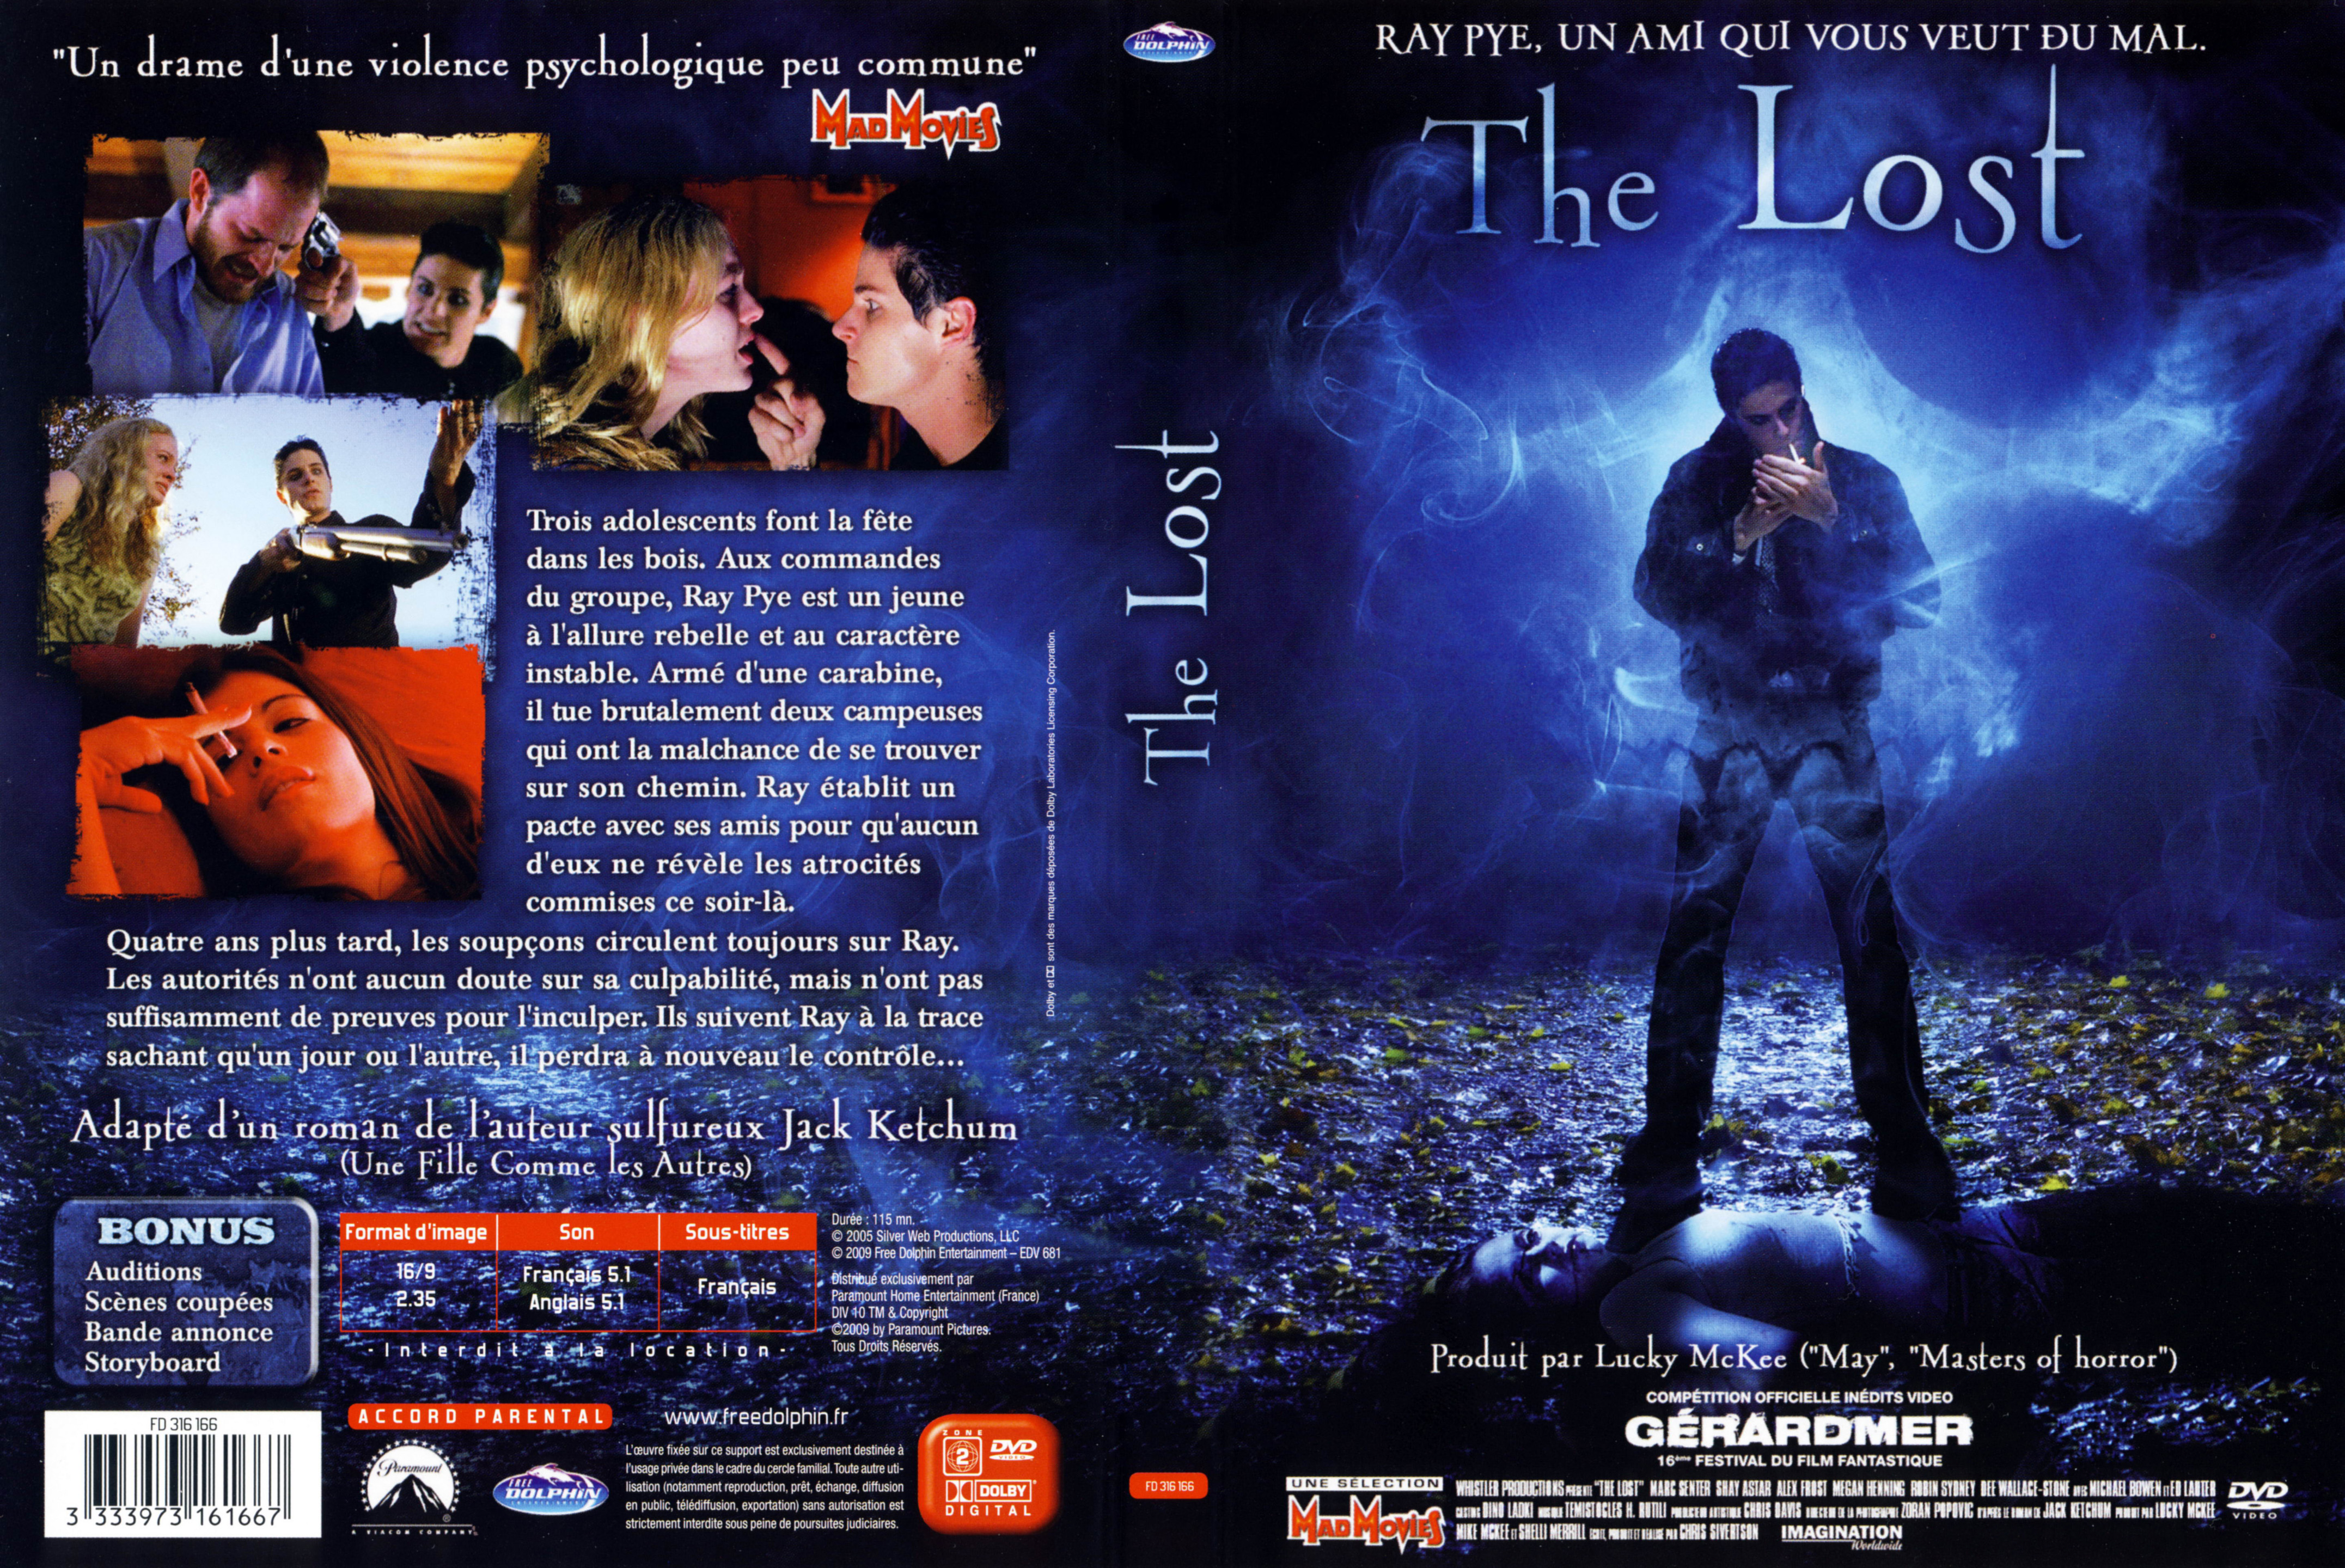 Jaquette DVD The lost